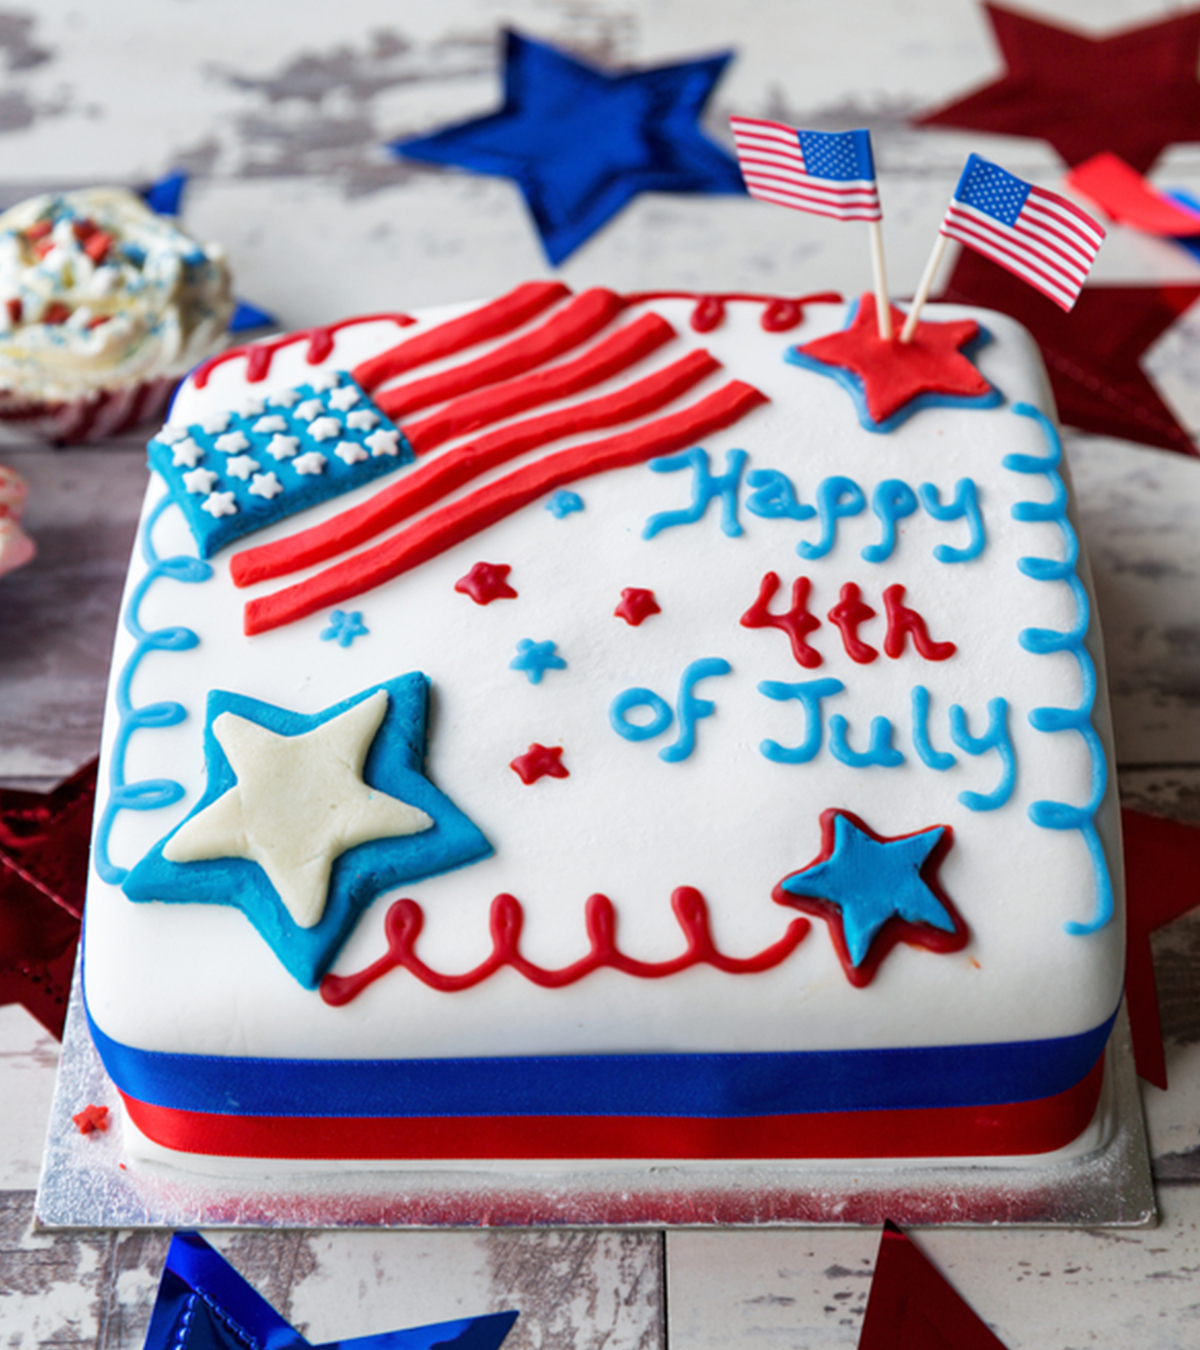 4th Of July Desserts That Never Go Out of Style